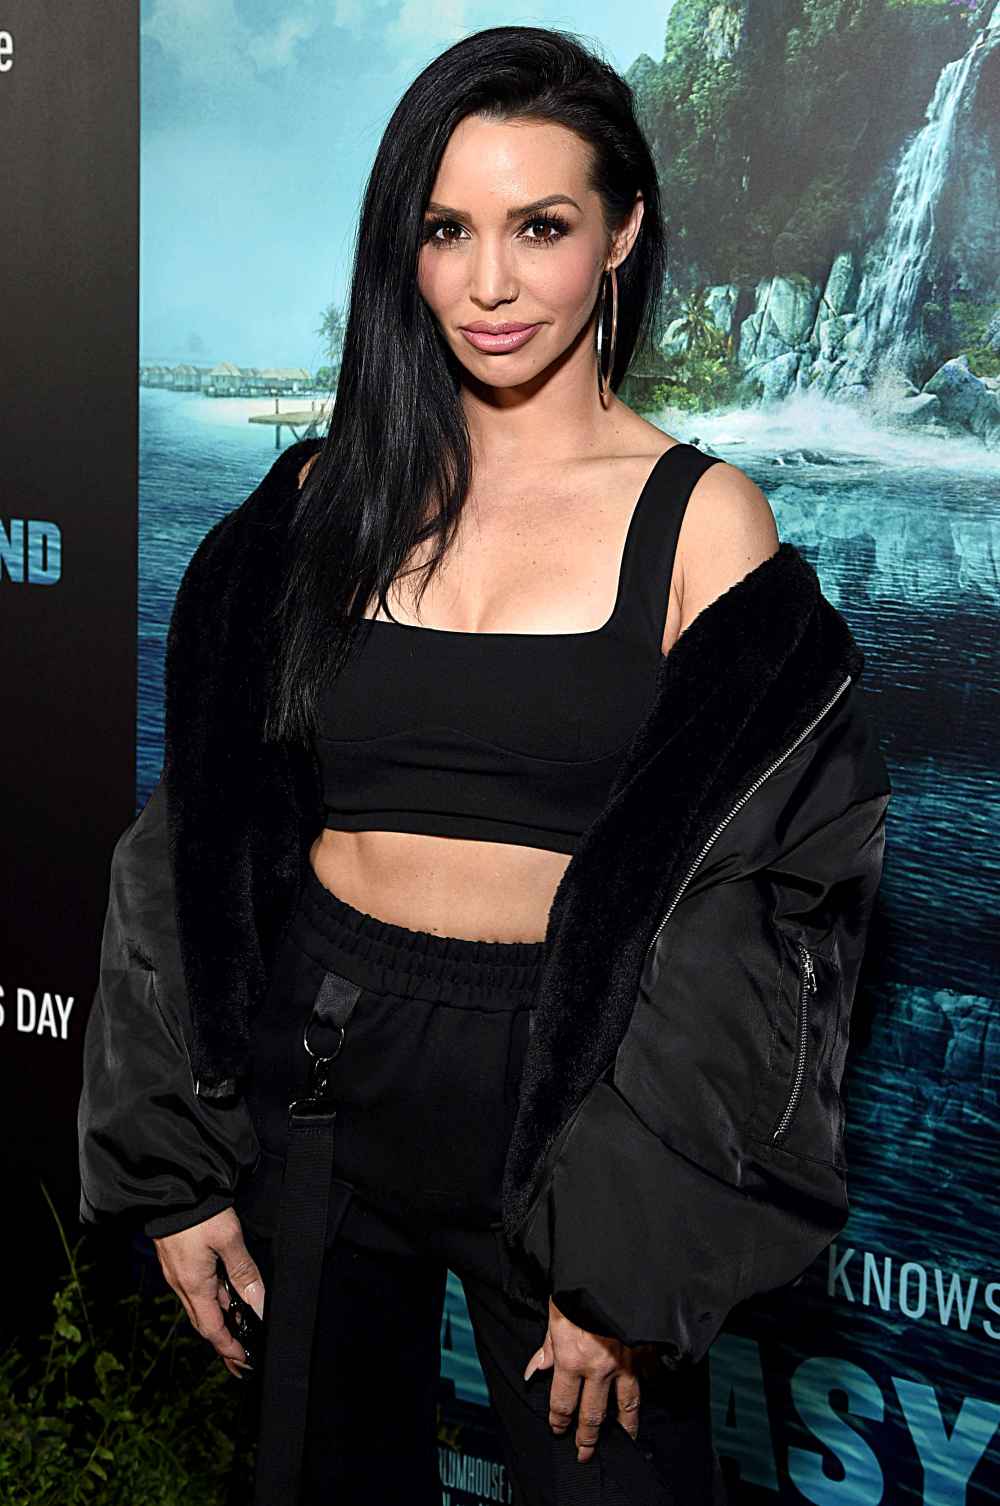 Scheana Shay Approves Justice for Scheana Campaign After Editor Drama